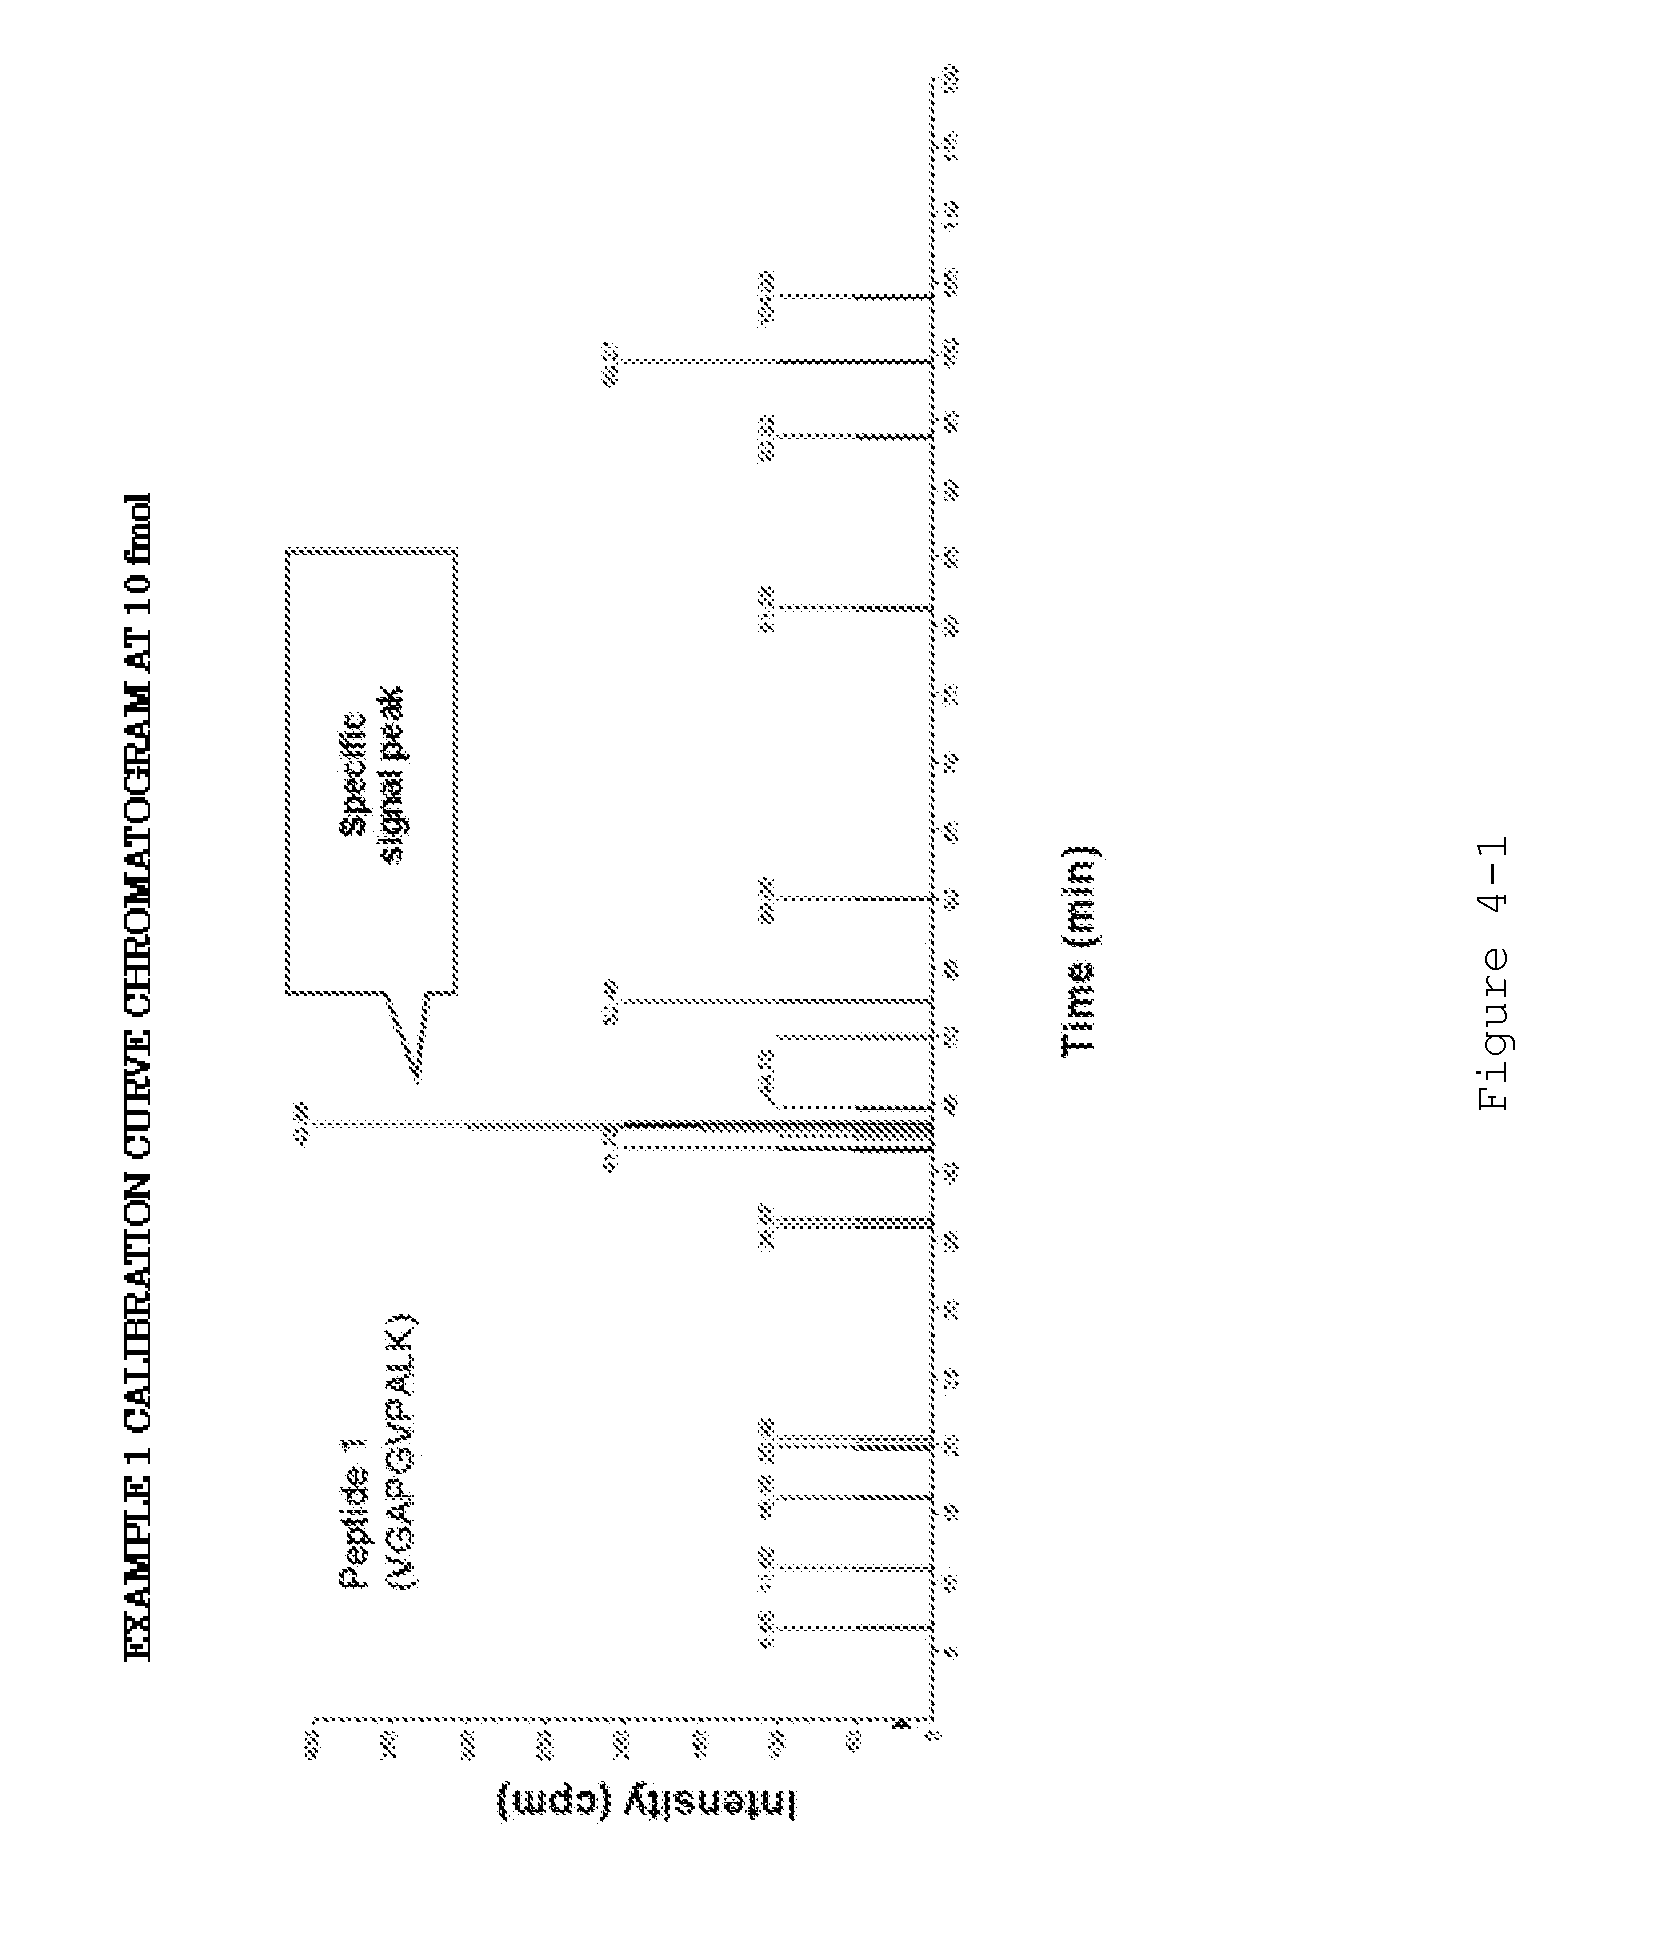 Evaluation Peptide For Use In Quantification Of Protein Using Mass Spectrometer, Artificial Standard Protein, And Method For Quantifying Protein